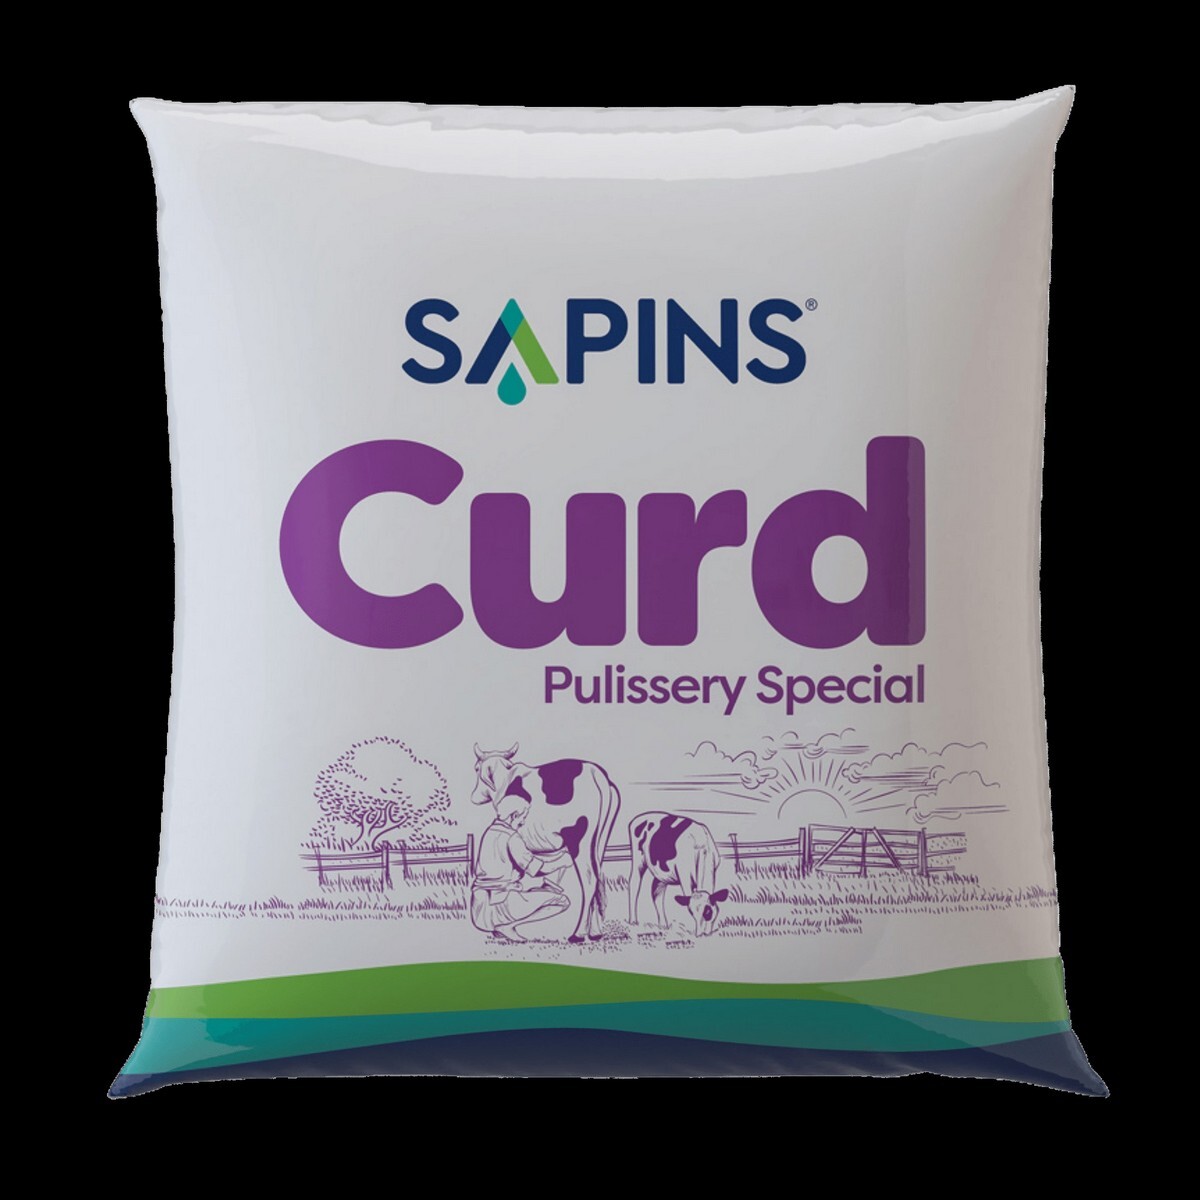 Sapins Curd Pulissery Special 450gm